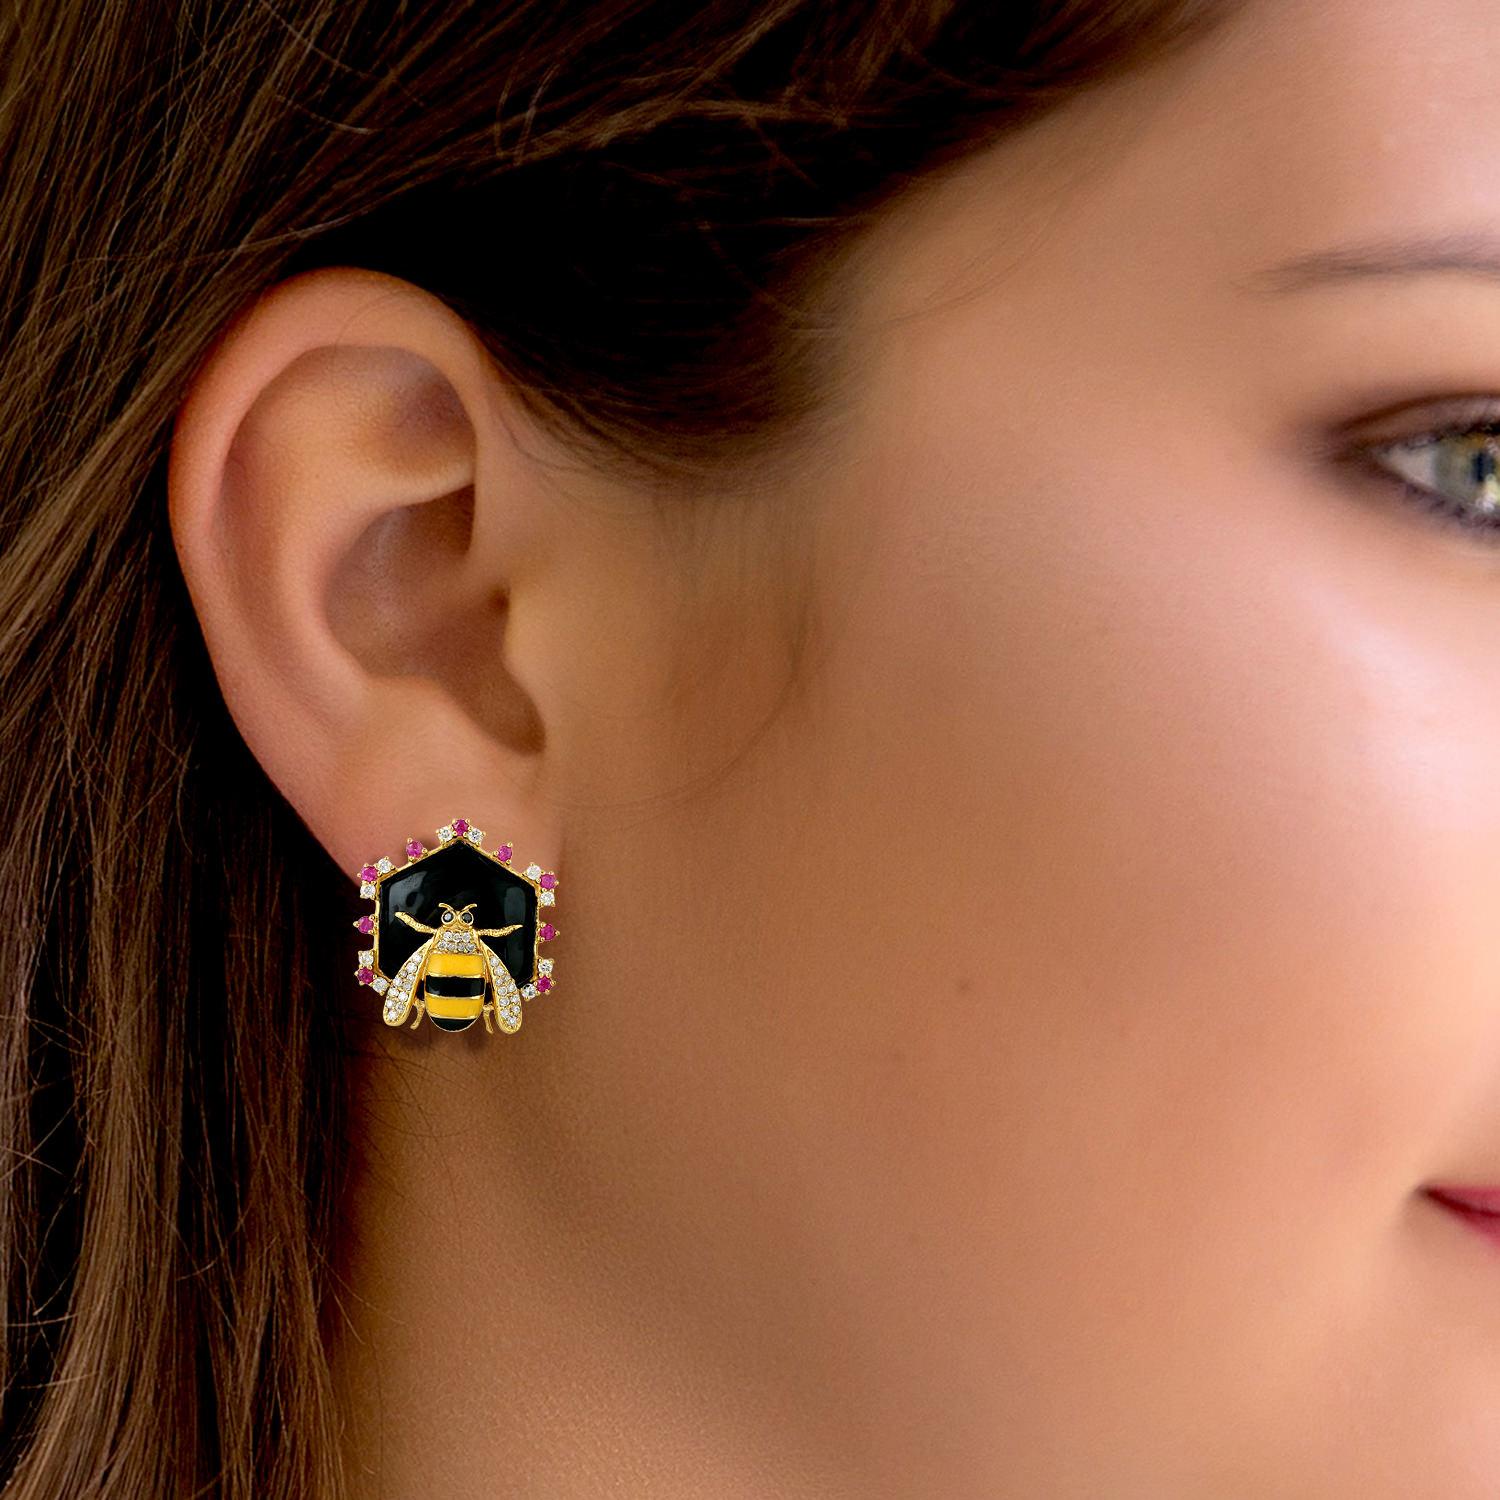 These honey bee stud earrings are crafted from 14-karat yellow gold.  It is set with .37 carats rubies & .30 carats of sparkling diamonds.  See other honey bee collection matching pieces.

The ring is a size 7 and may be resized to larger or smaller